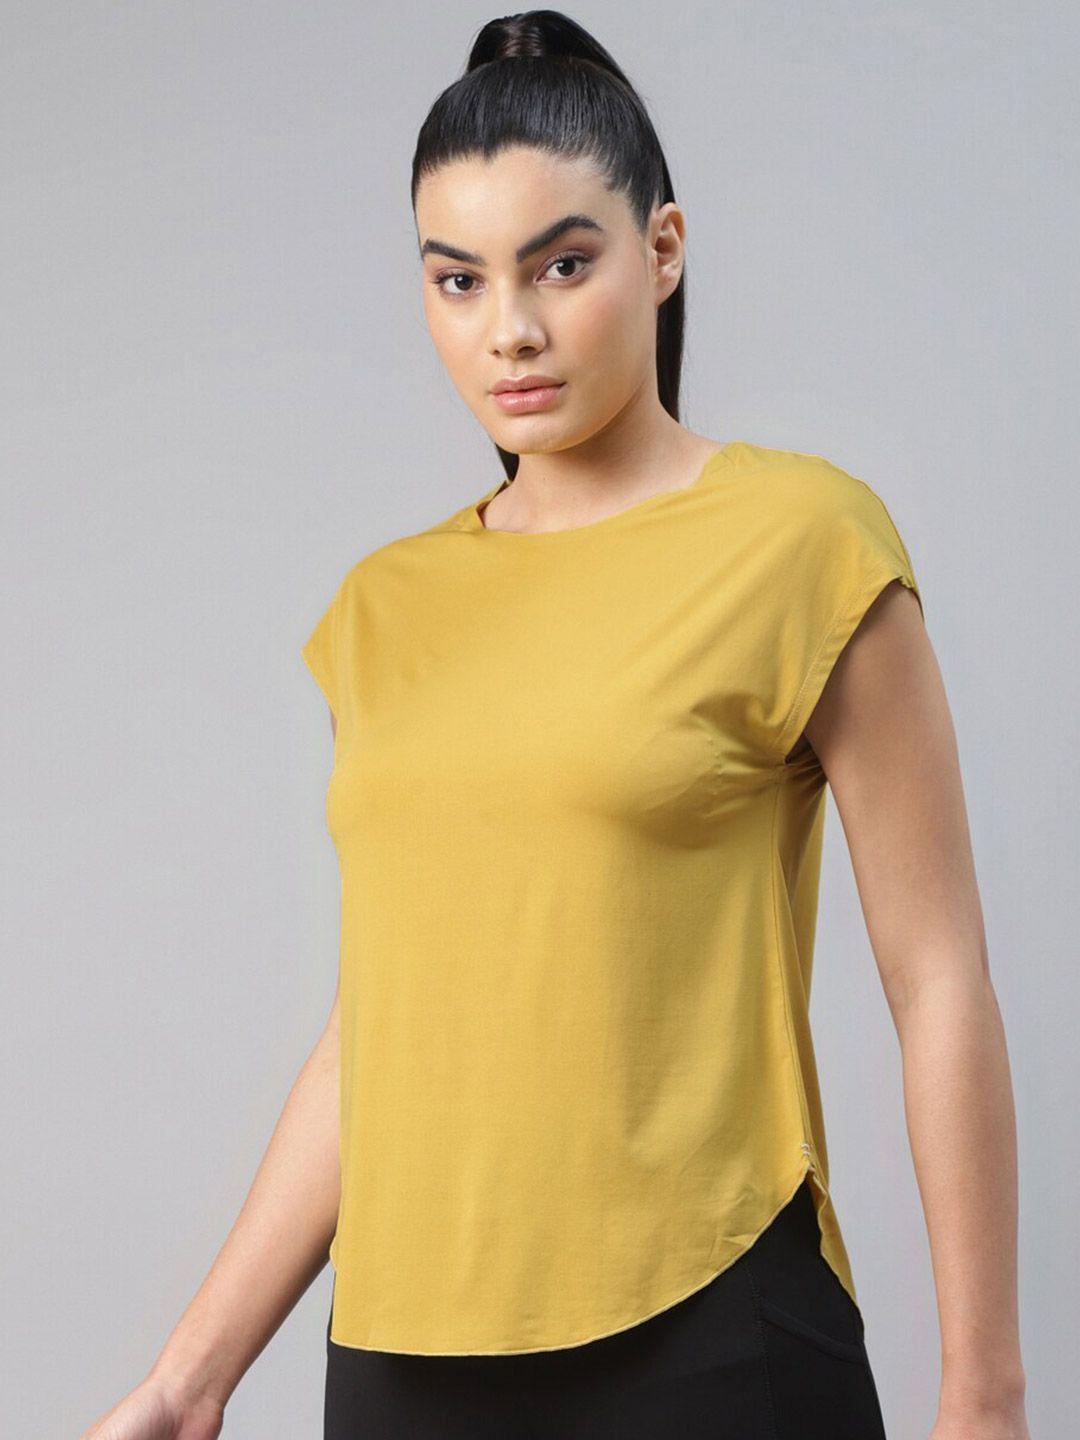 dida women extended sleeves pockets t-shirt